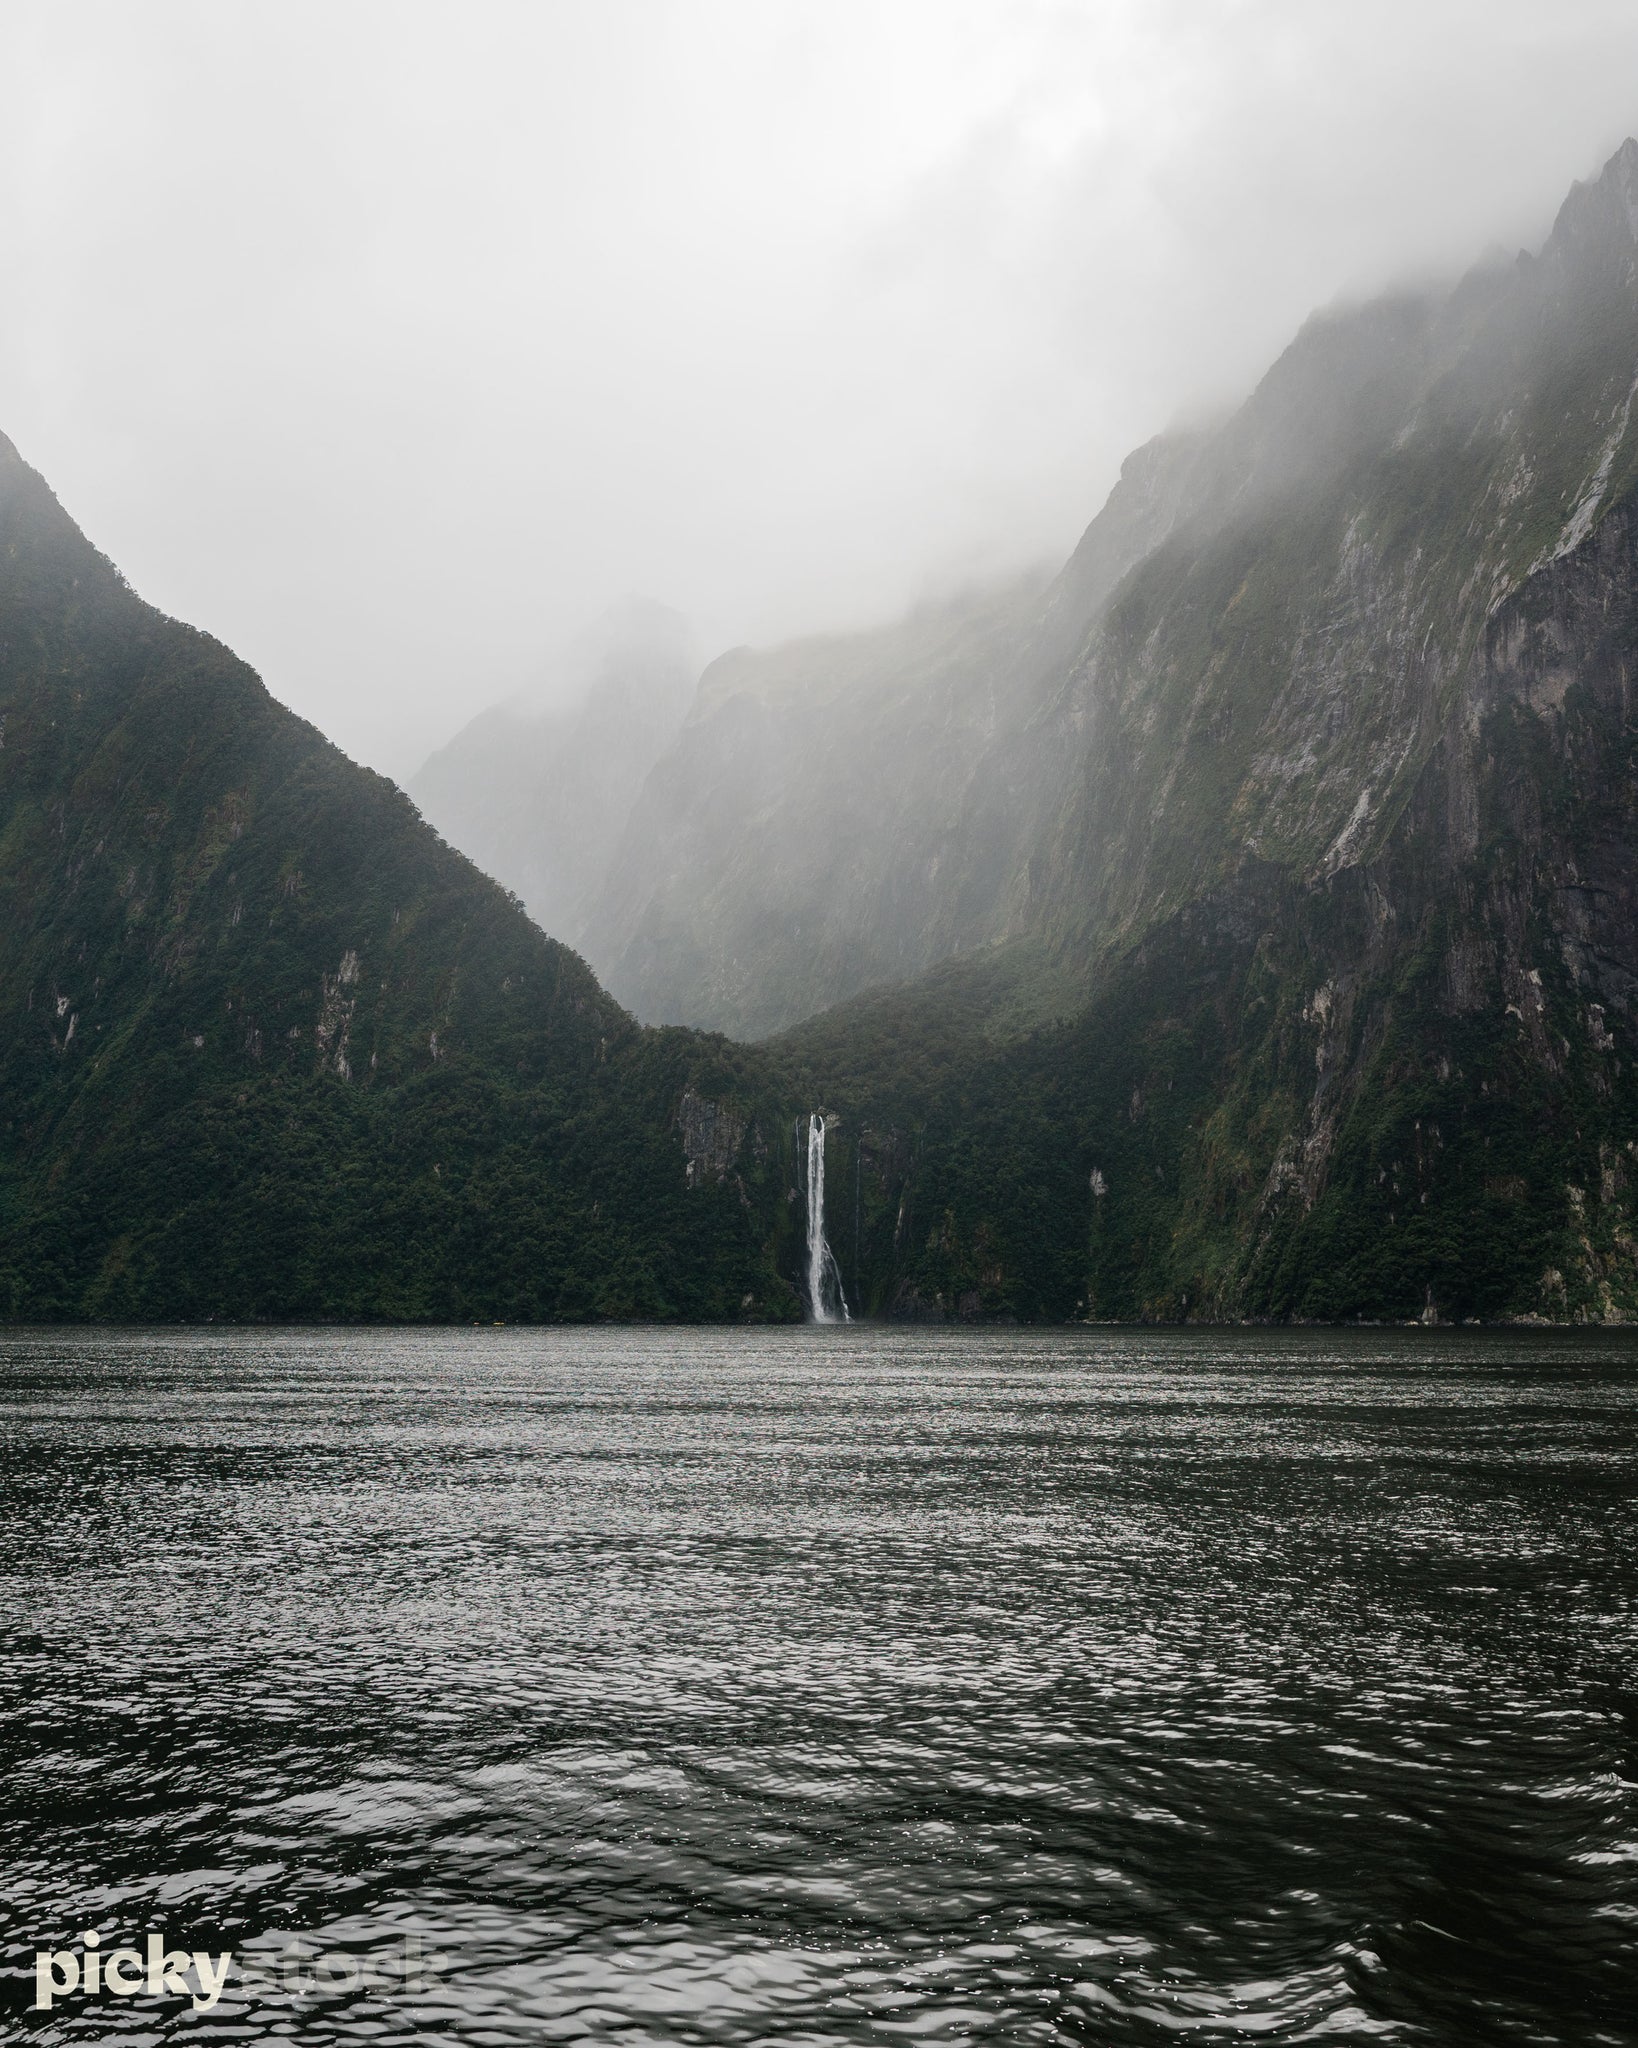 Portrait view of Milford Sounds, view from a boat. Foggy day, with dense fog low over the valley. Large cliffs in background. Water is dark and green. Image is moody. Waterfall is in the middle of the image.